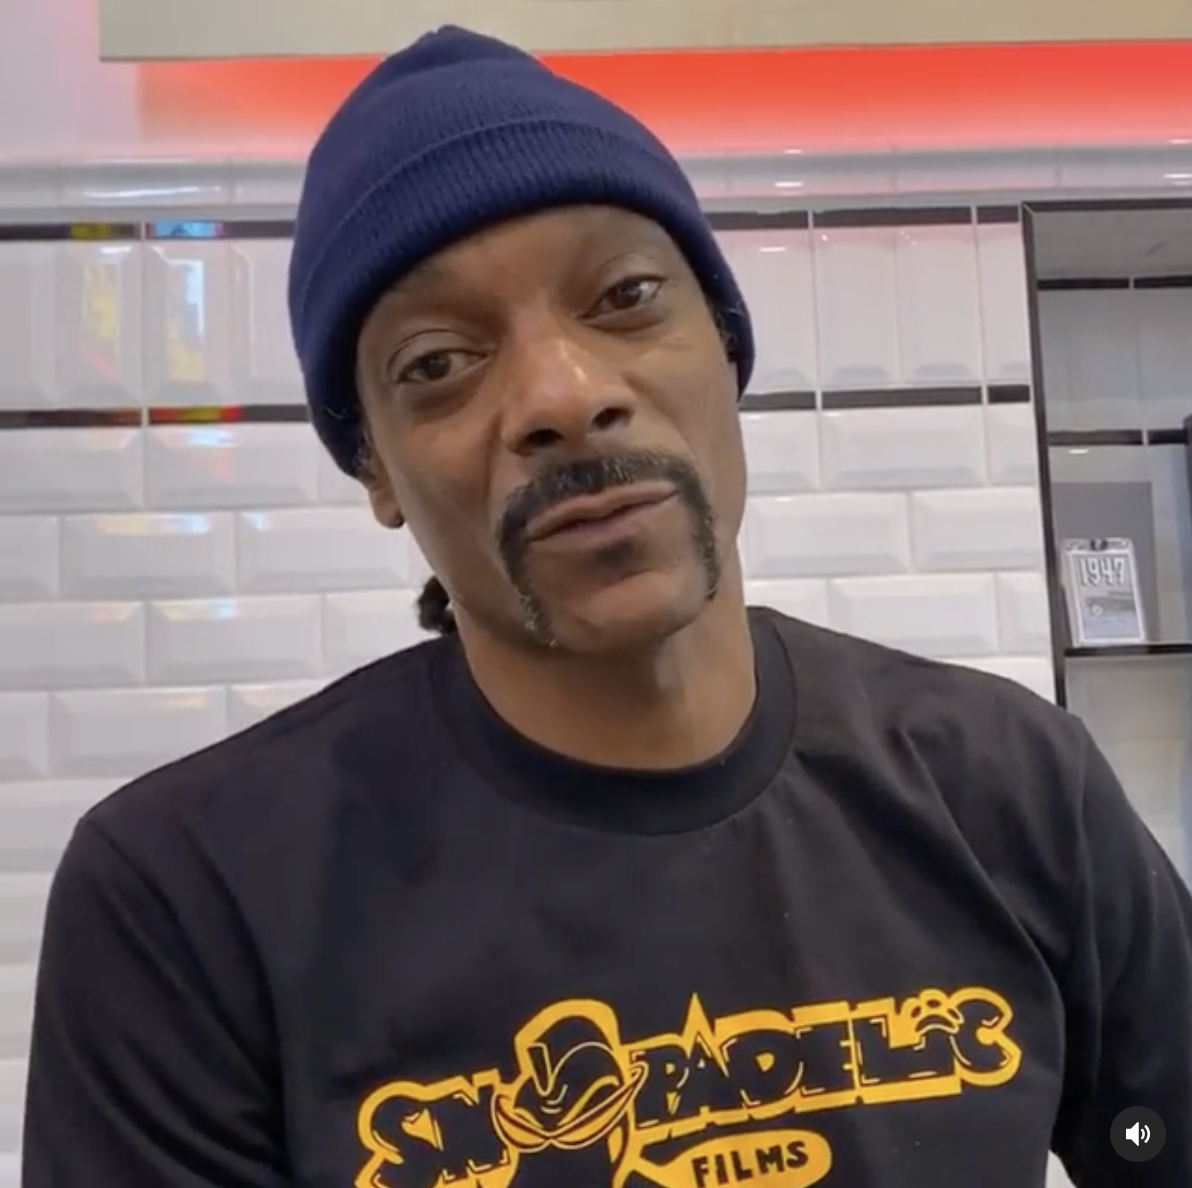 Snoop talking and wearing a beanie